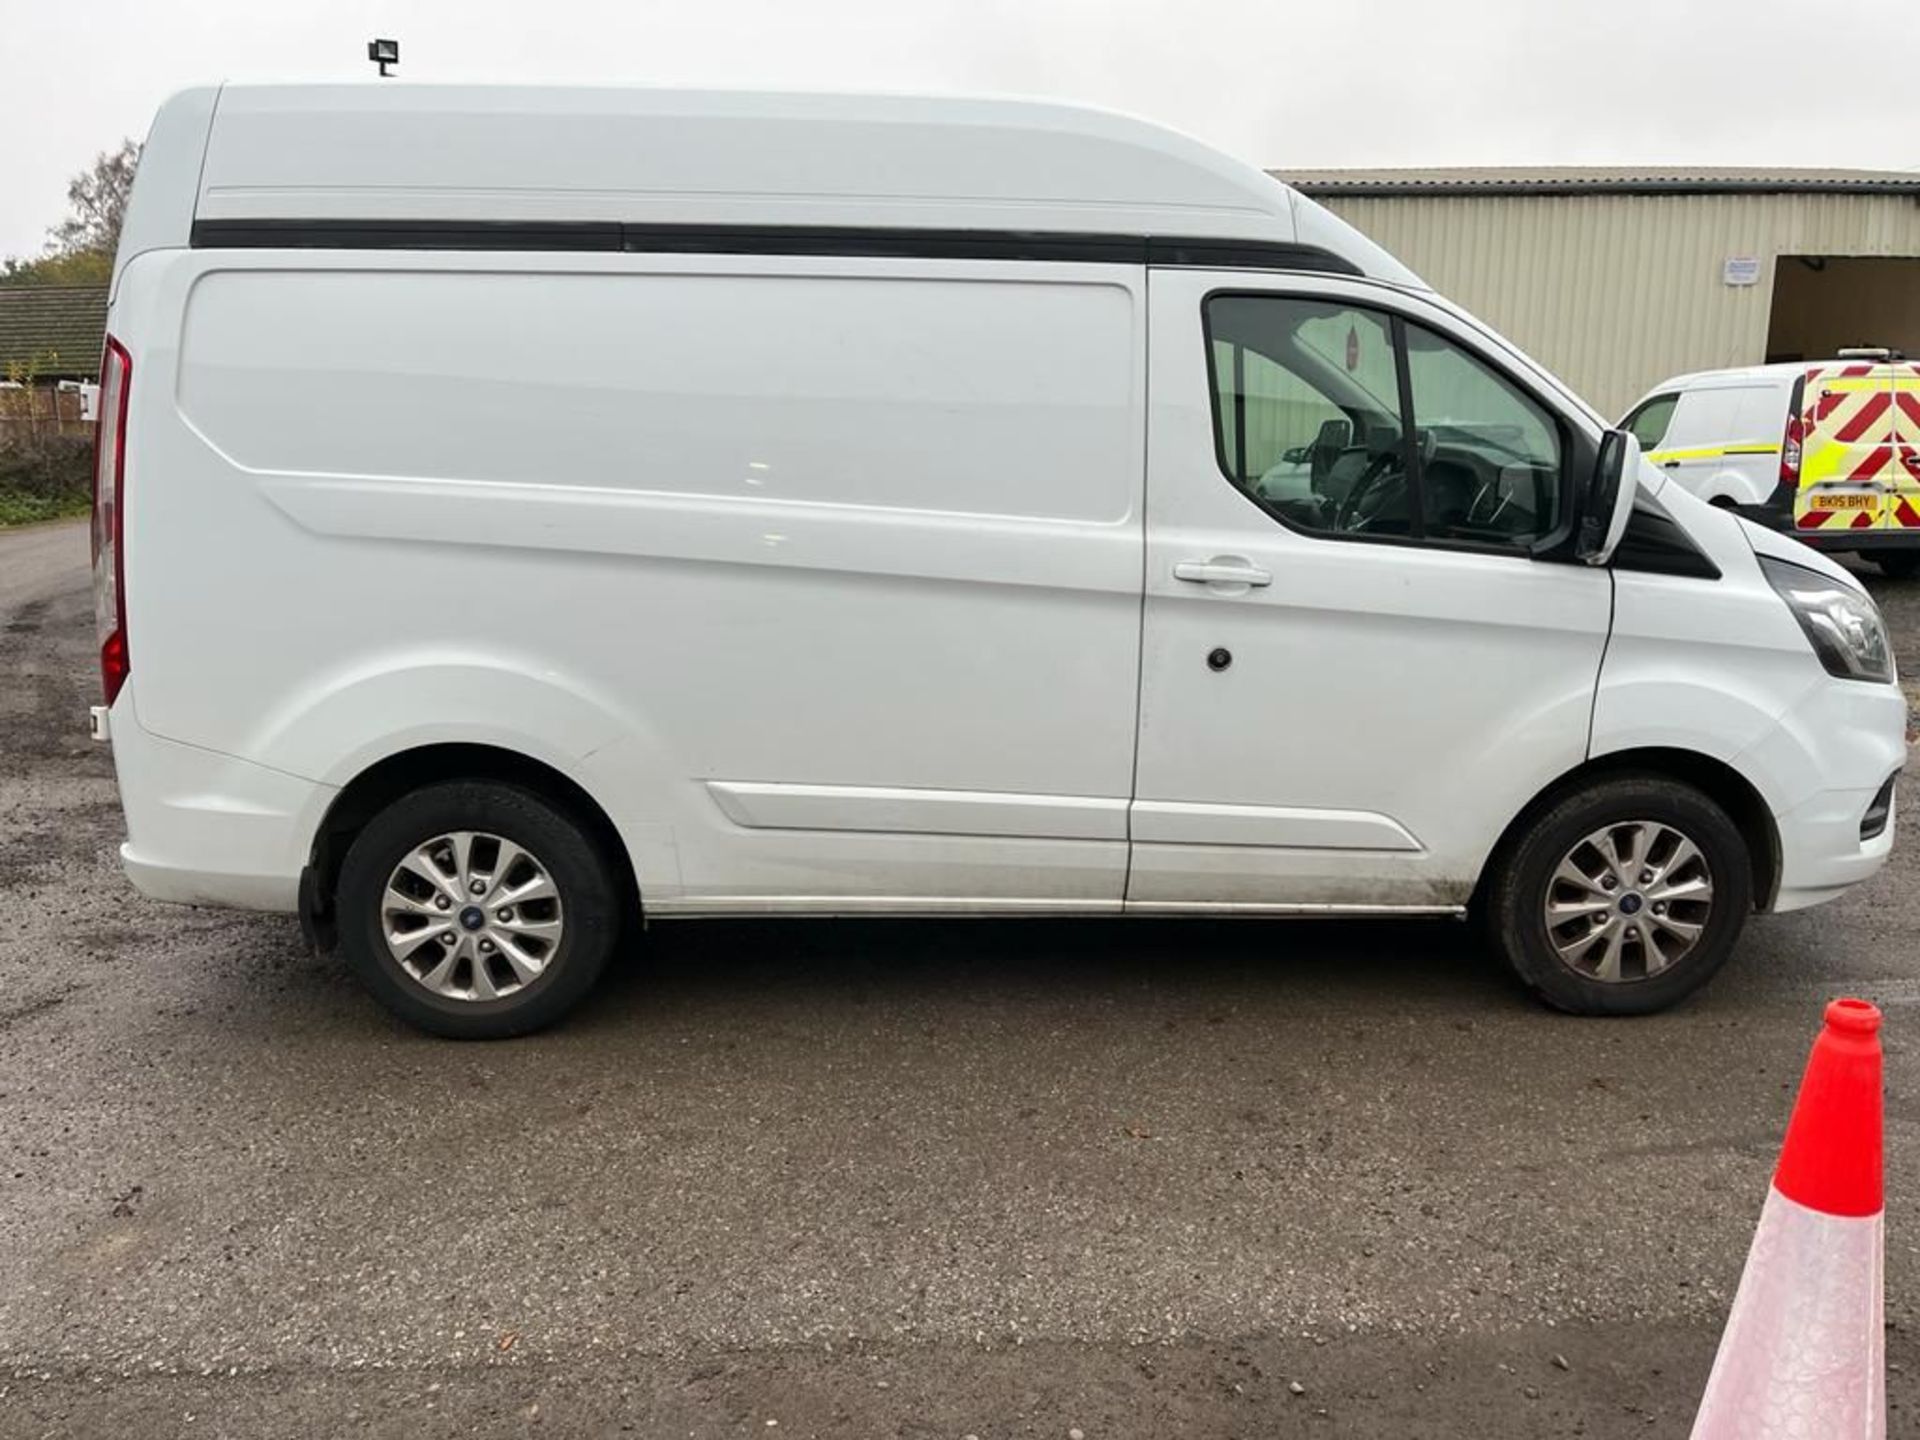 2019 19 ford Transit custom limited high roof - 87k miles - air con - alloy wheels - ply lined - Image 7 of 9